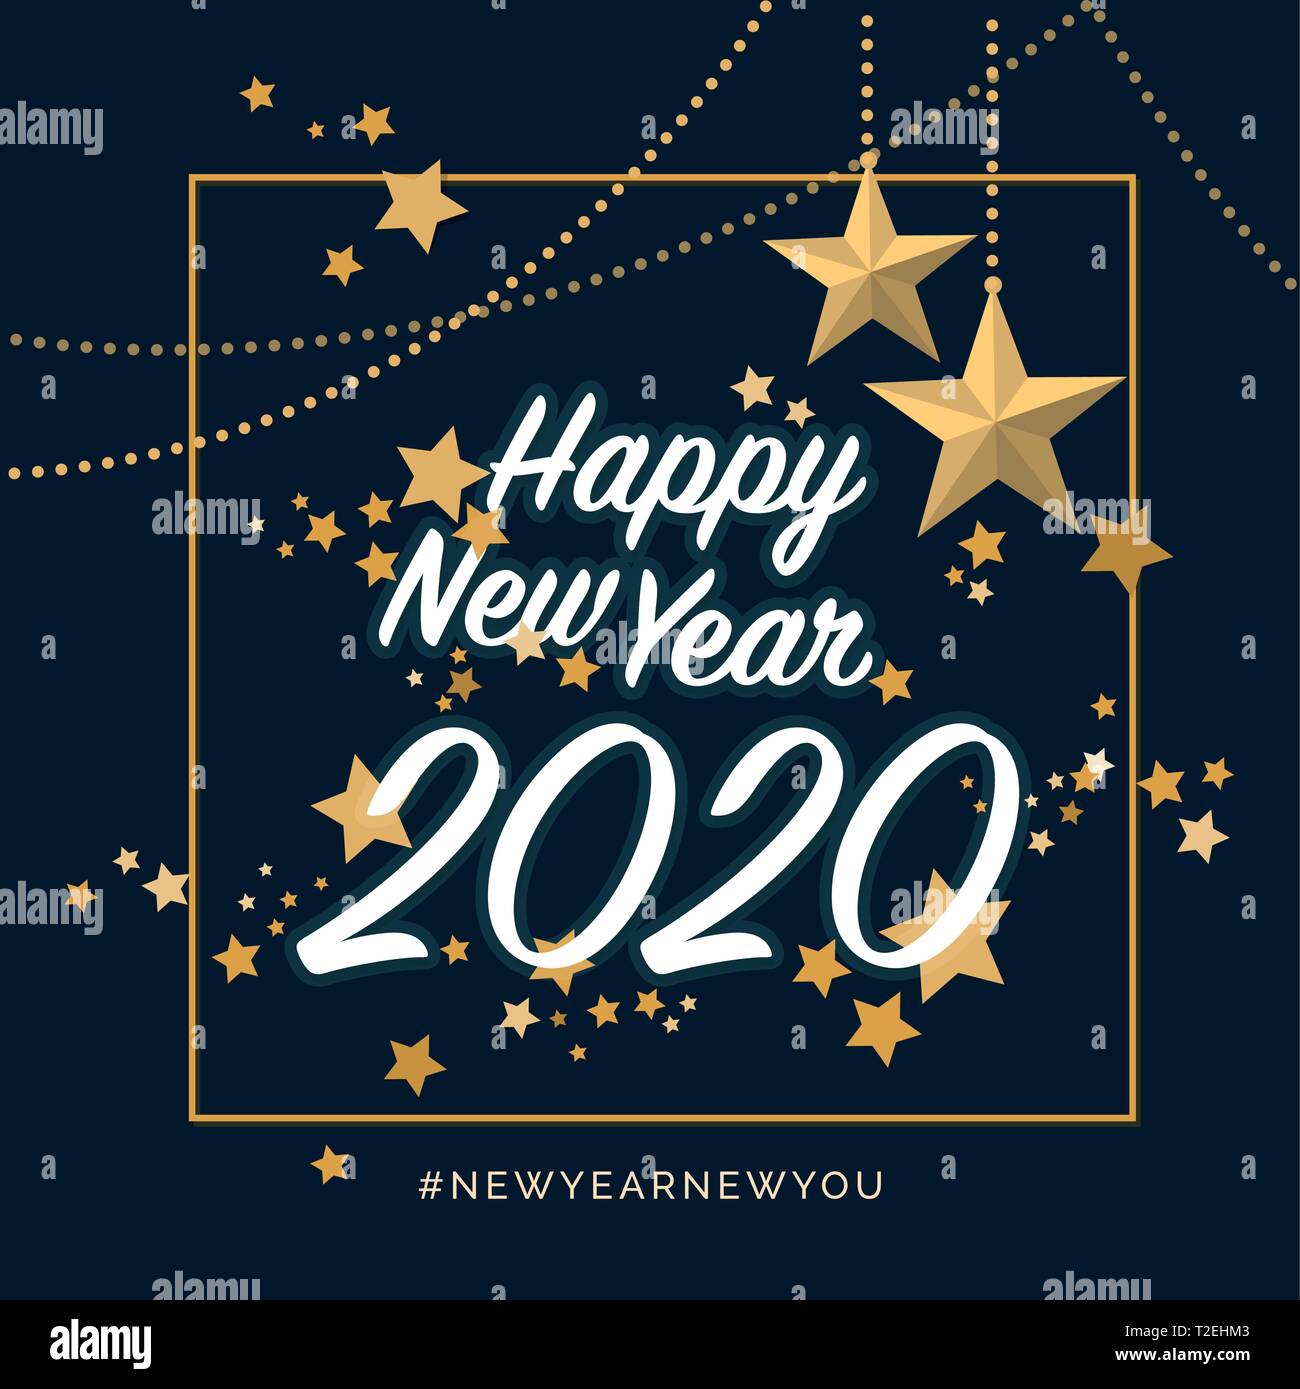 Happy new year 2020 with golden stars, social media post and wish ...